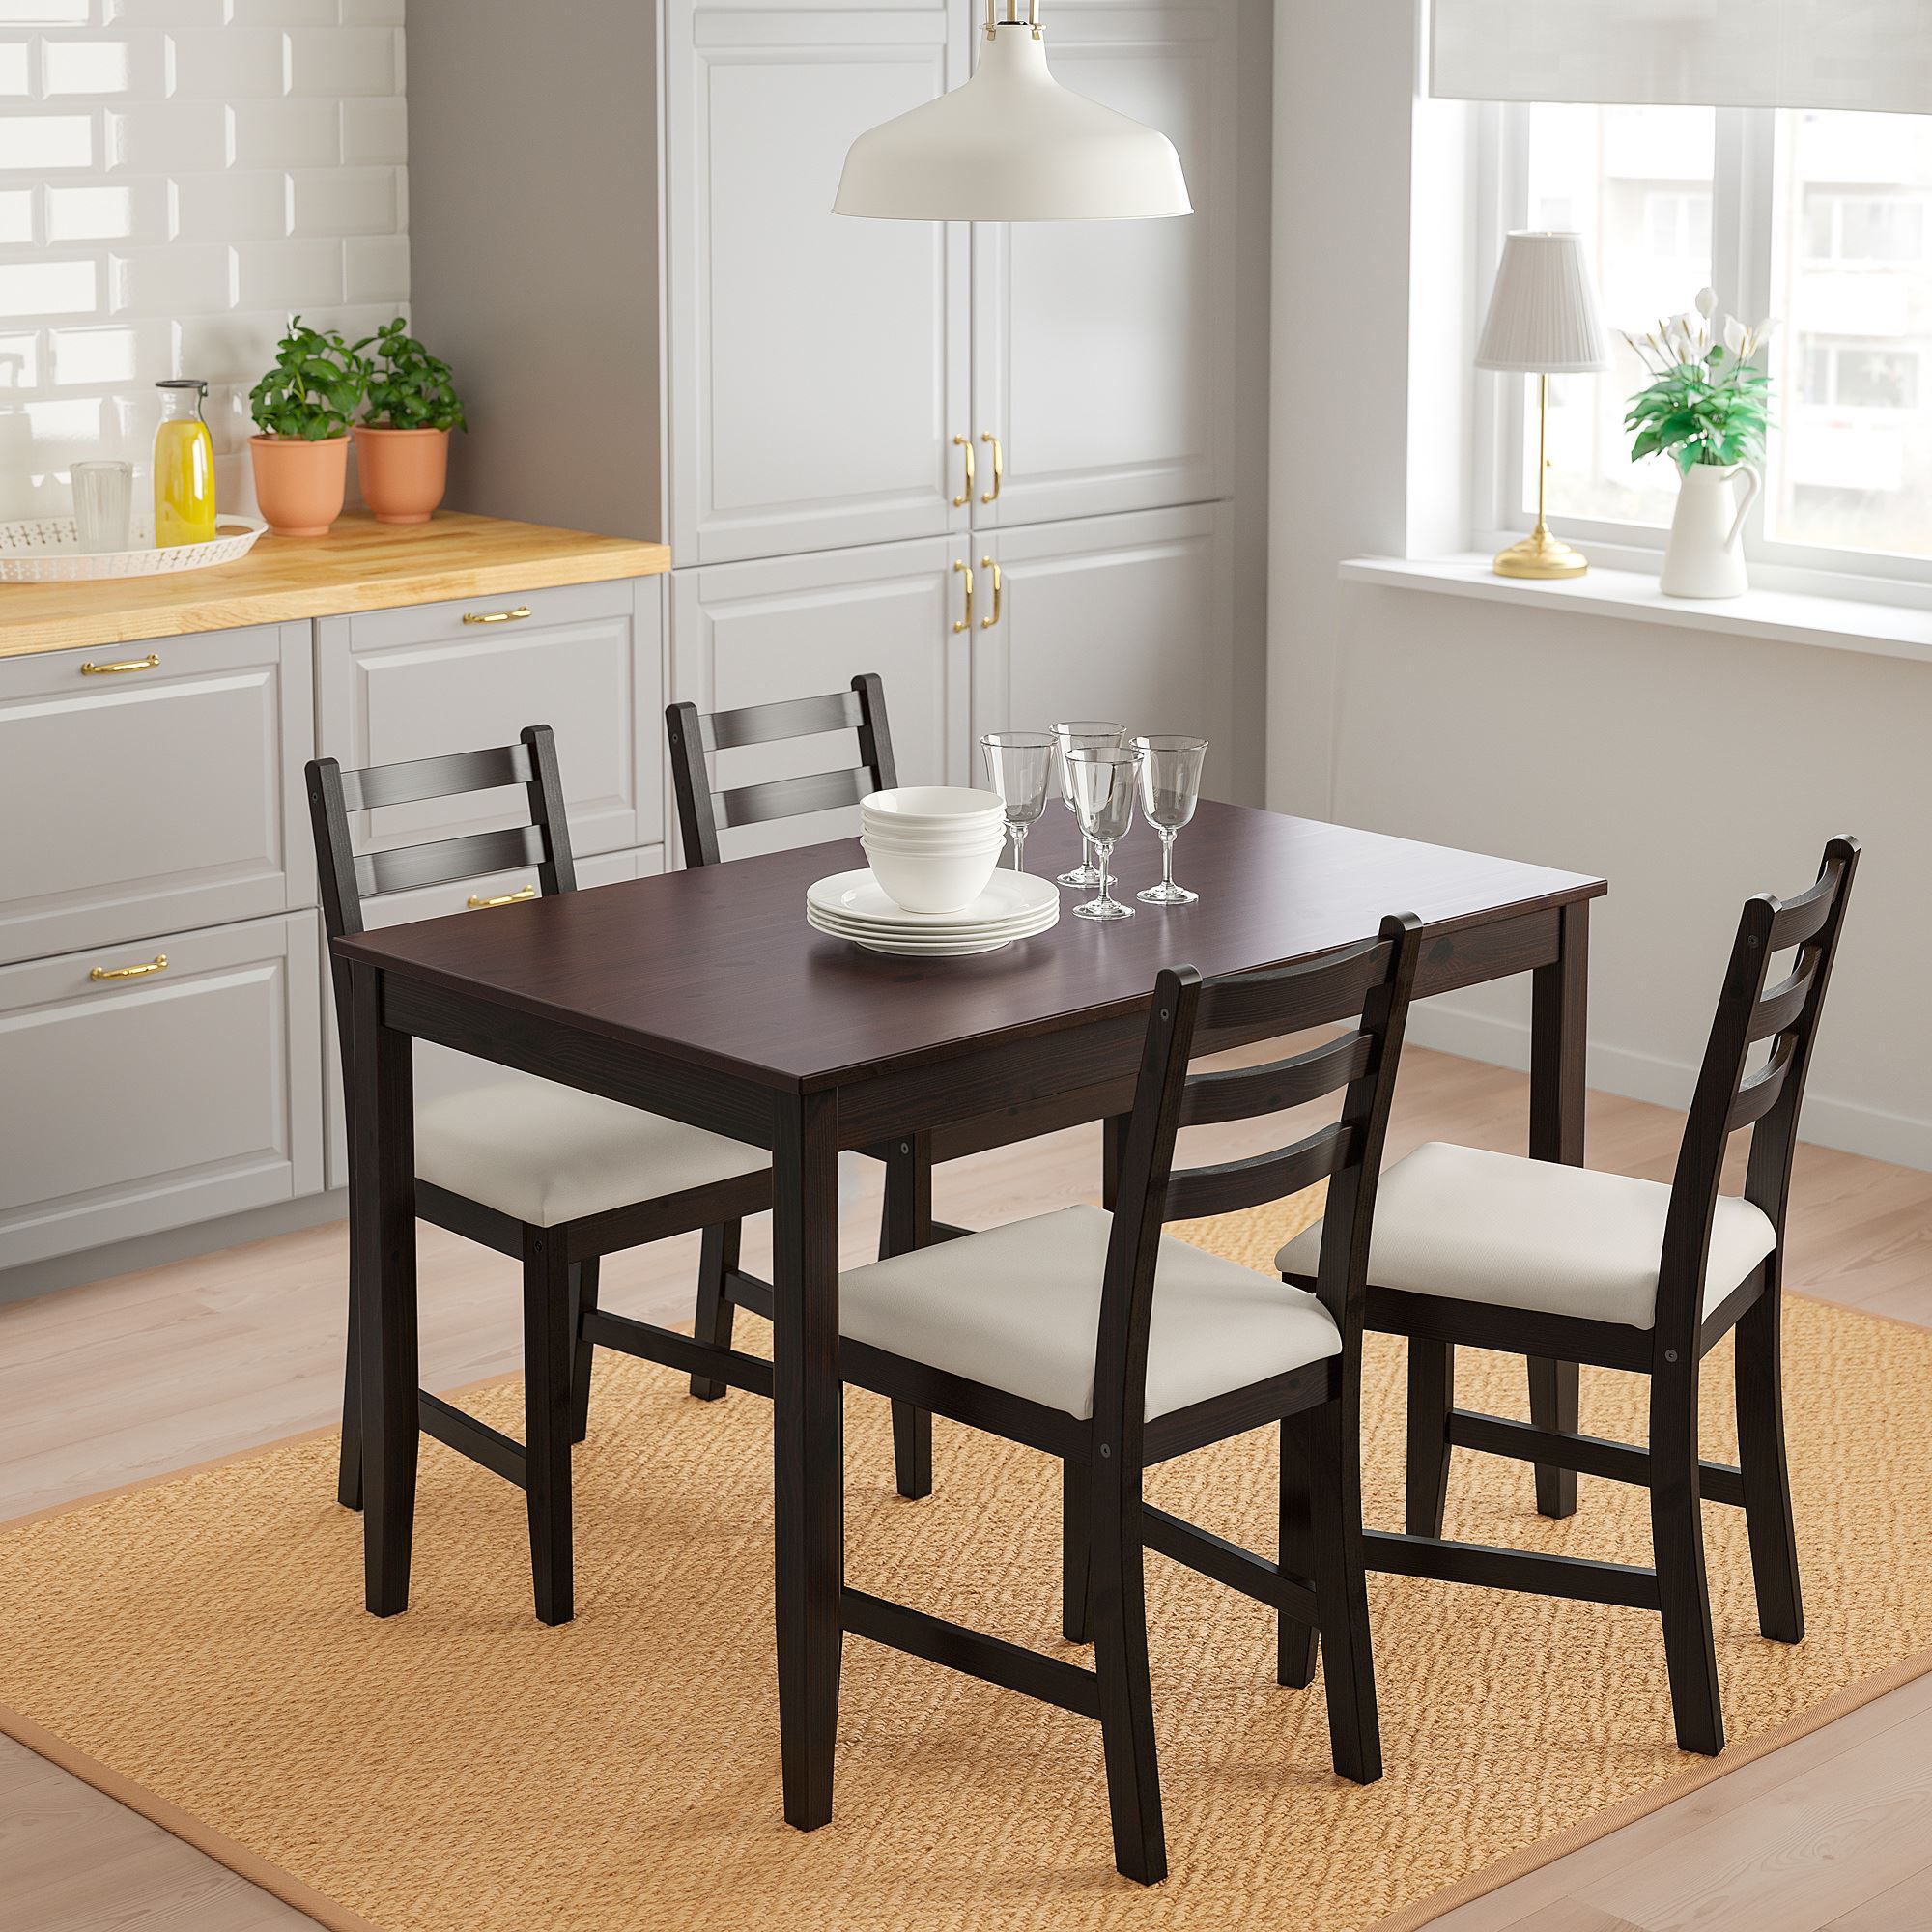 Well Liked Lerhamn, Dining Table And Chairs, Black Brown/vittaryd Beige With Brown Dining Tables (View 3 of 15)